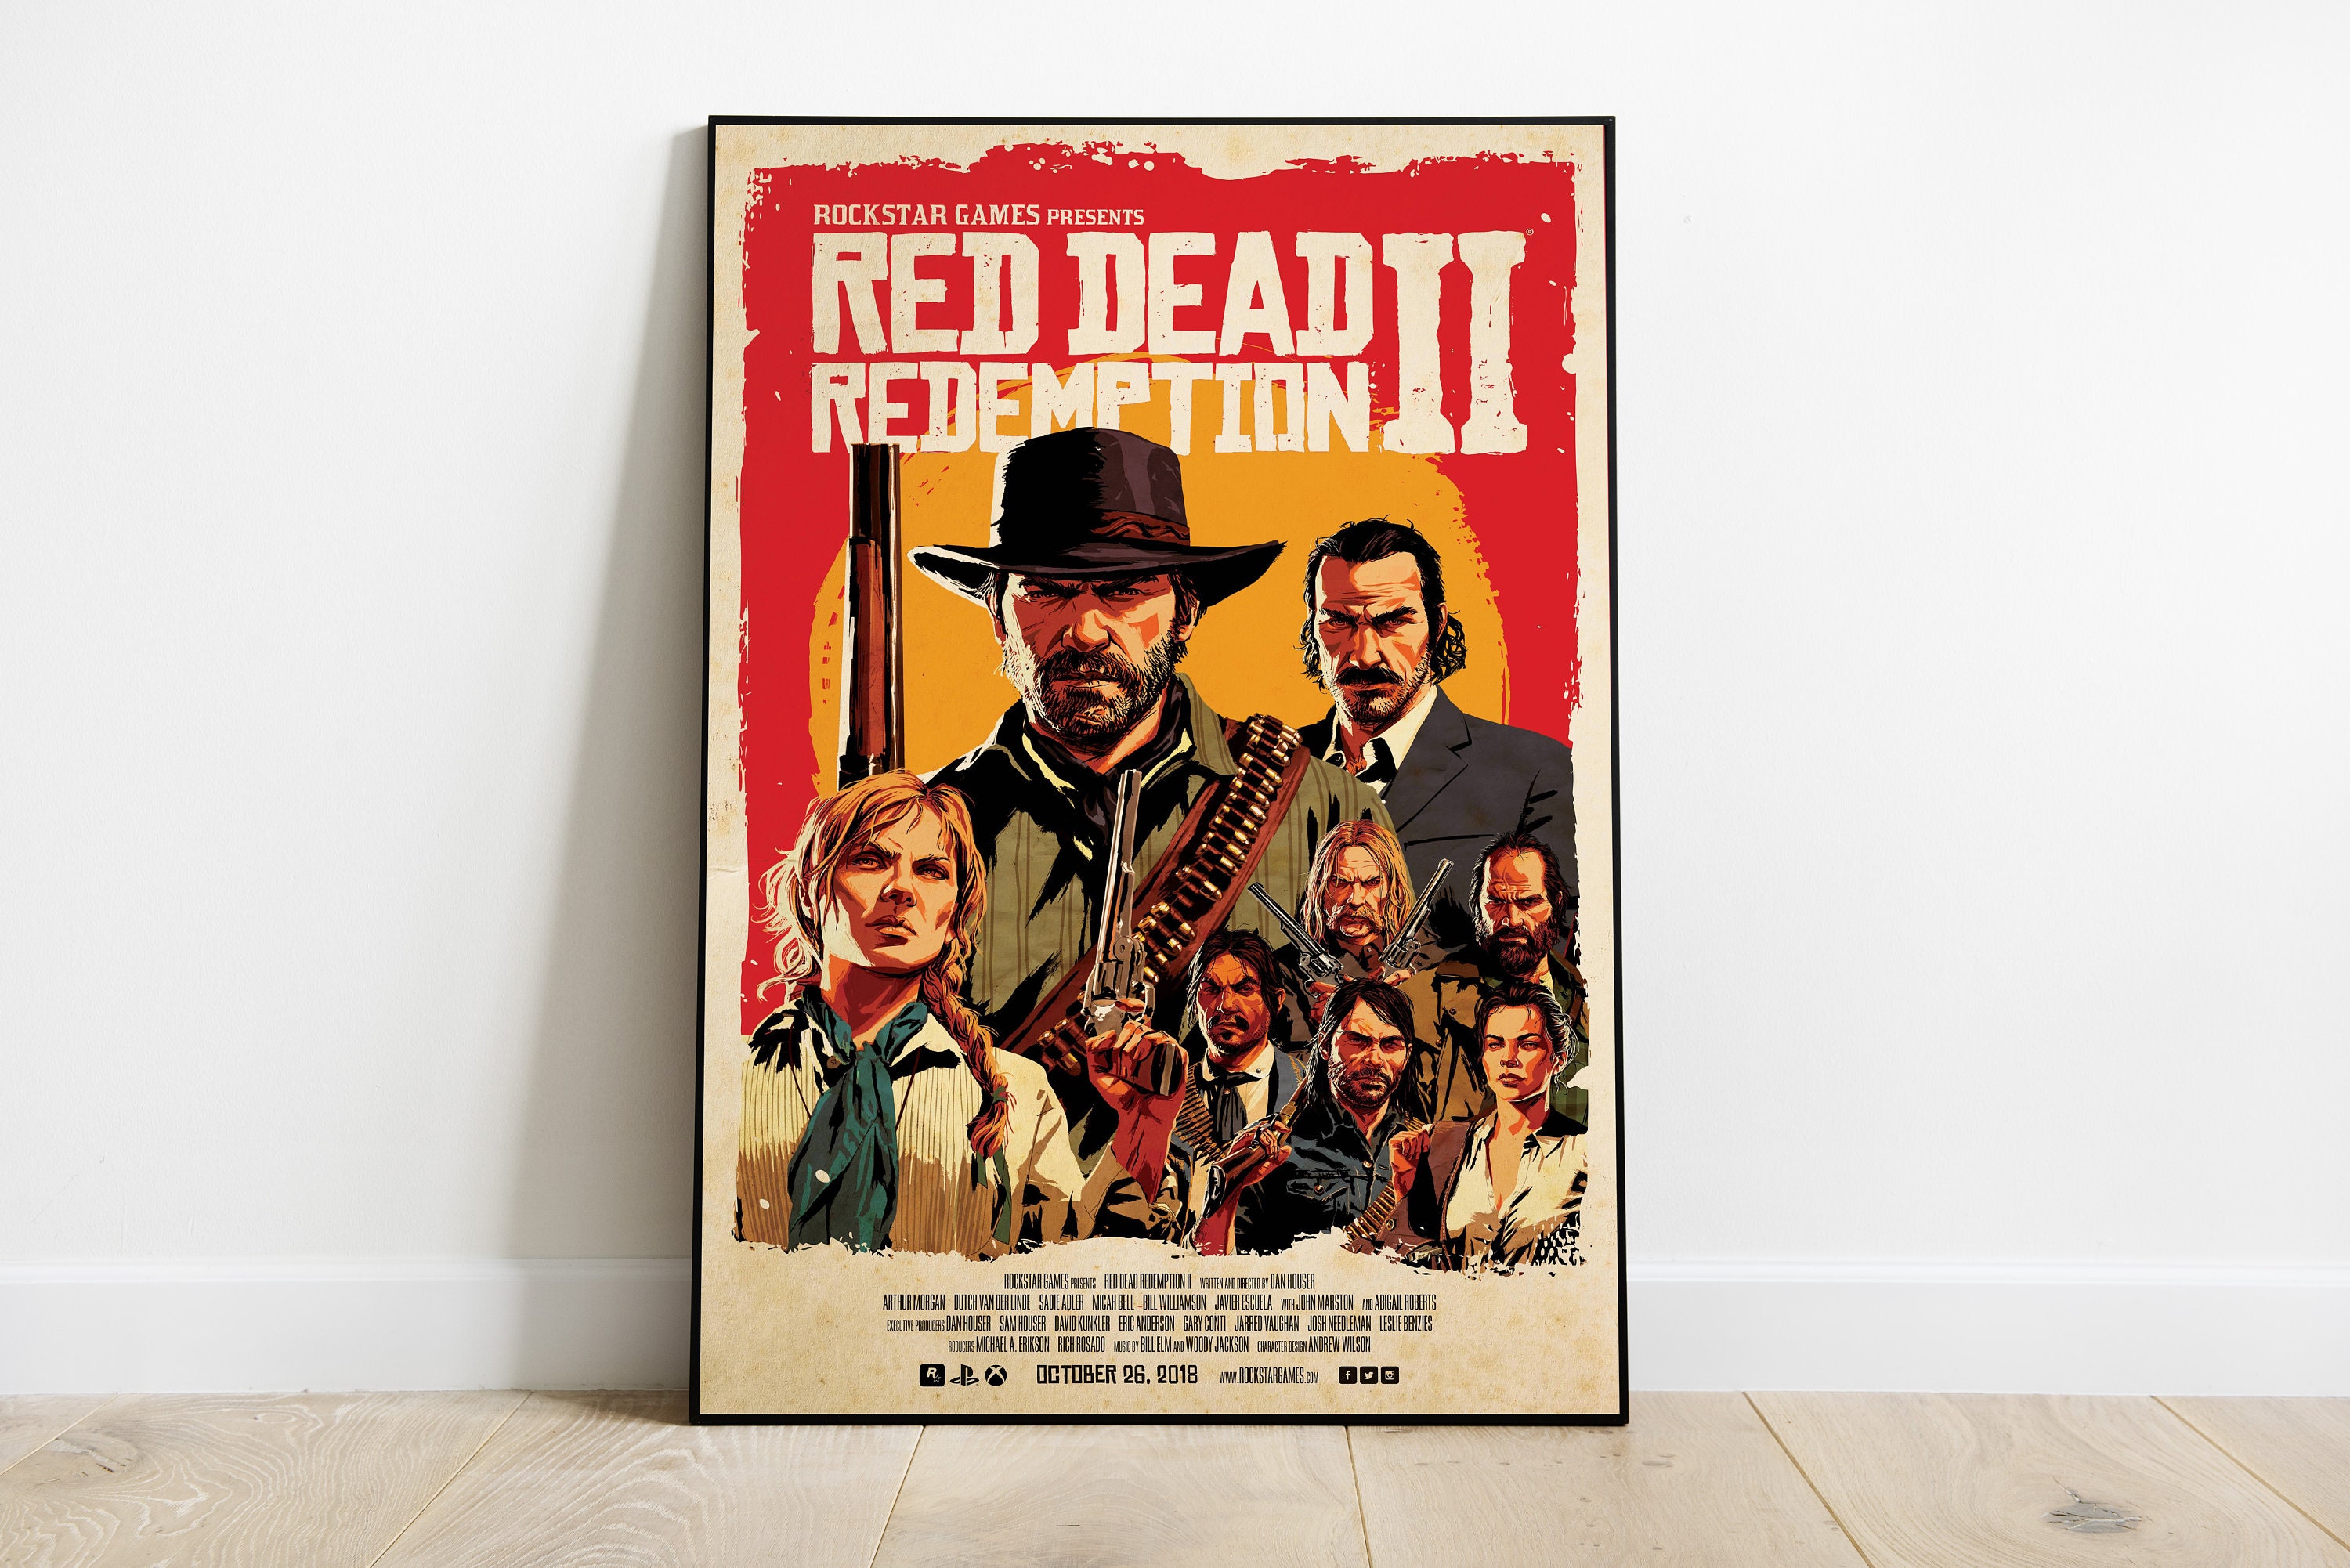  Arthur Morgan Red Dead Redemption 2 Game Poster Iron Painting  Wall Poster Metal Vintage Band Tin Signs Retro Garage Plaque Decorative  Living Room Garden Bedroom Office Hotel Cafe Bar 